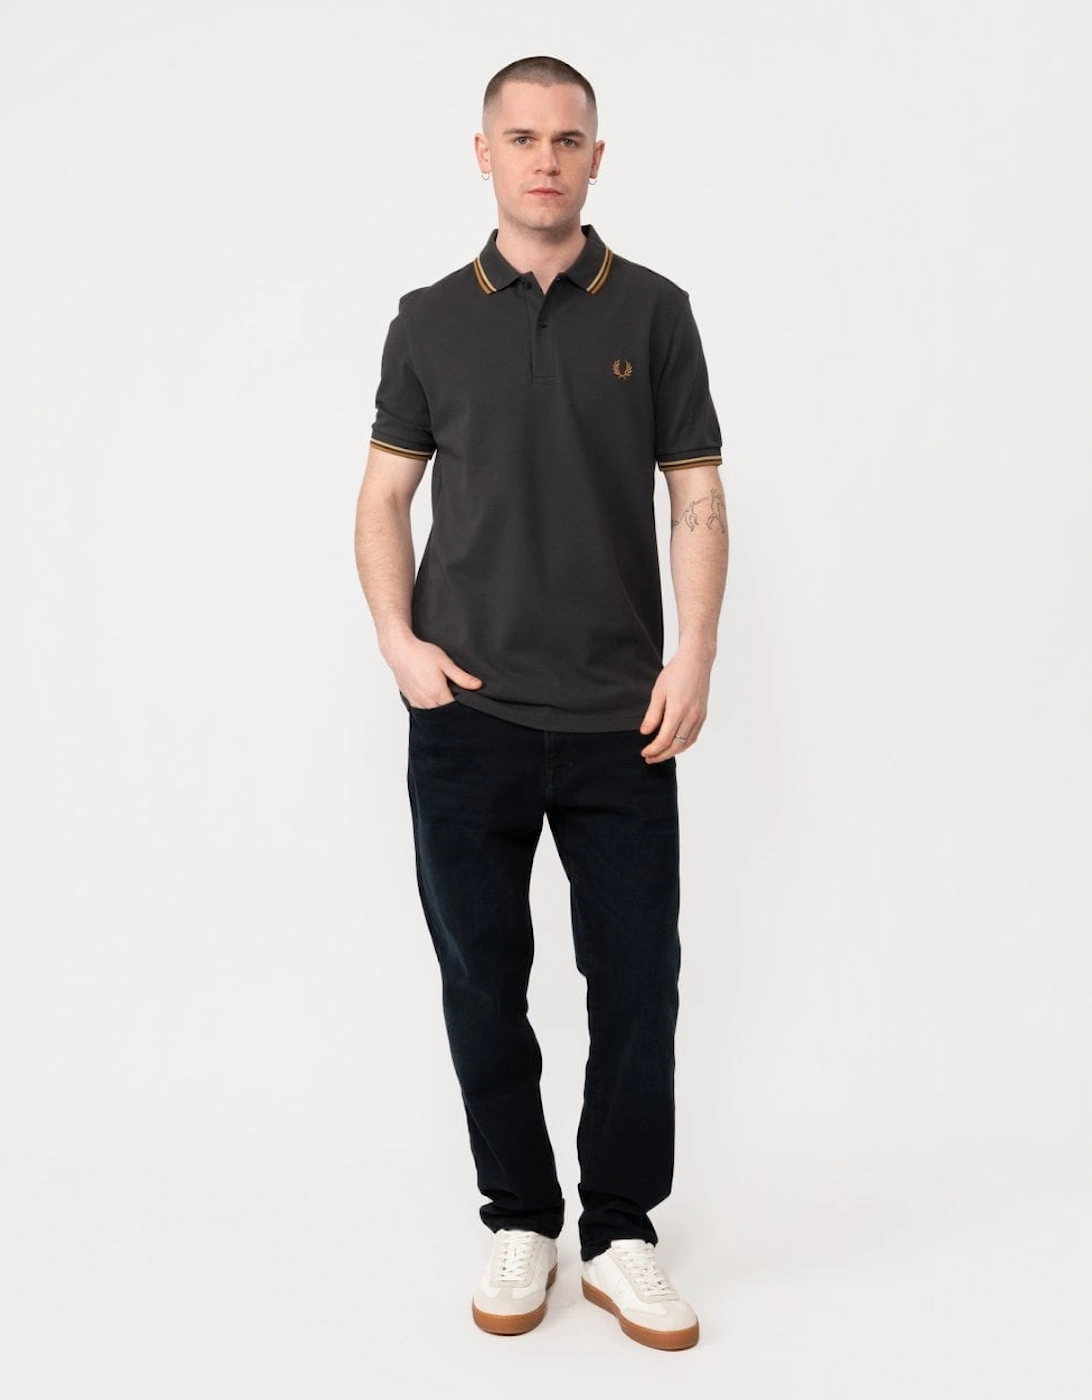 Mens Twin Tipped Signature Polo Shirt